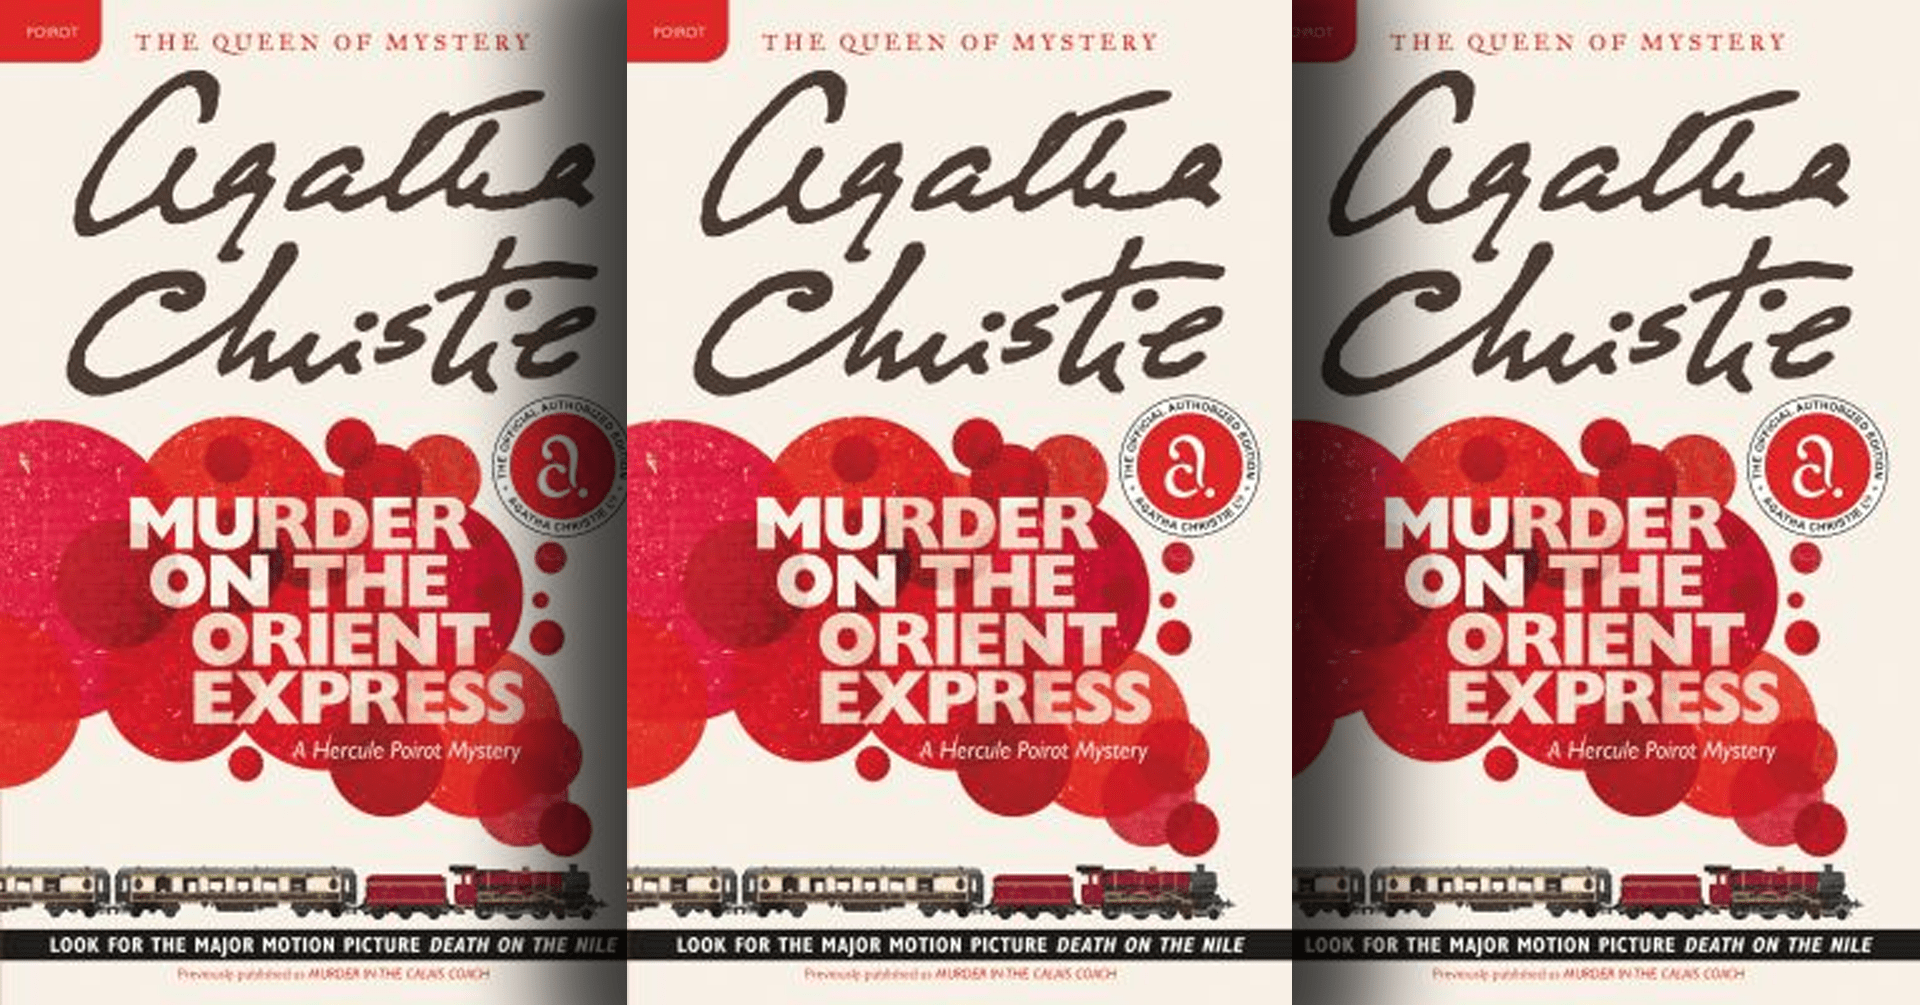 Murder on the Orient Express by Agatha Christie (book cover)